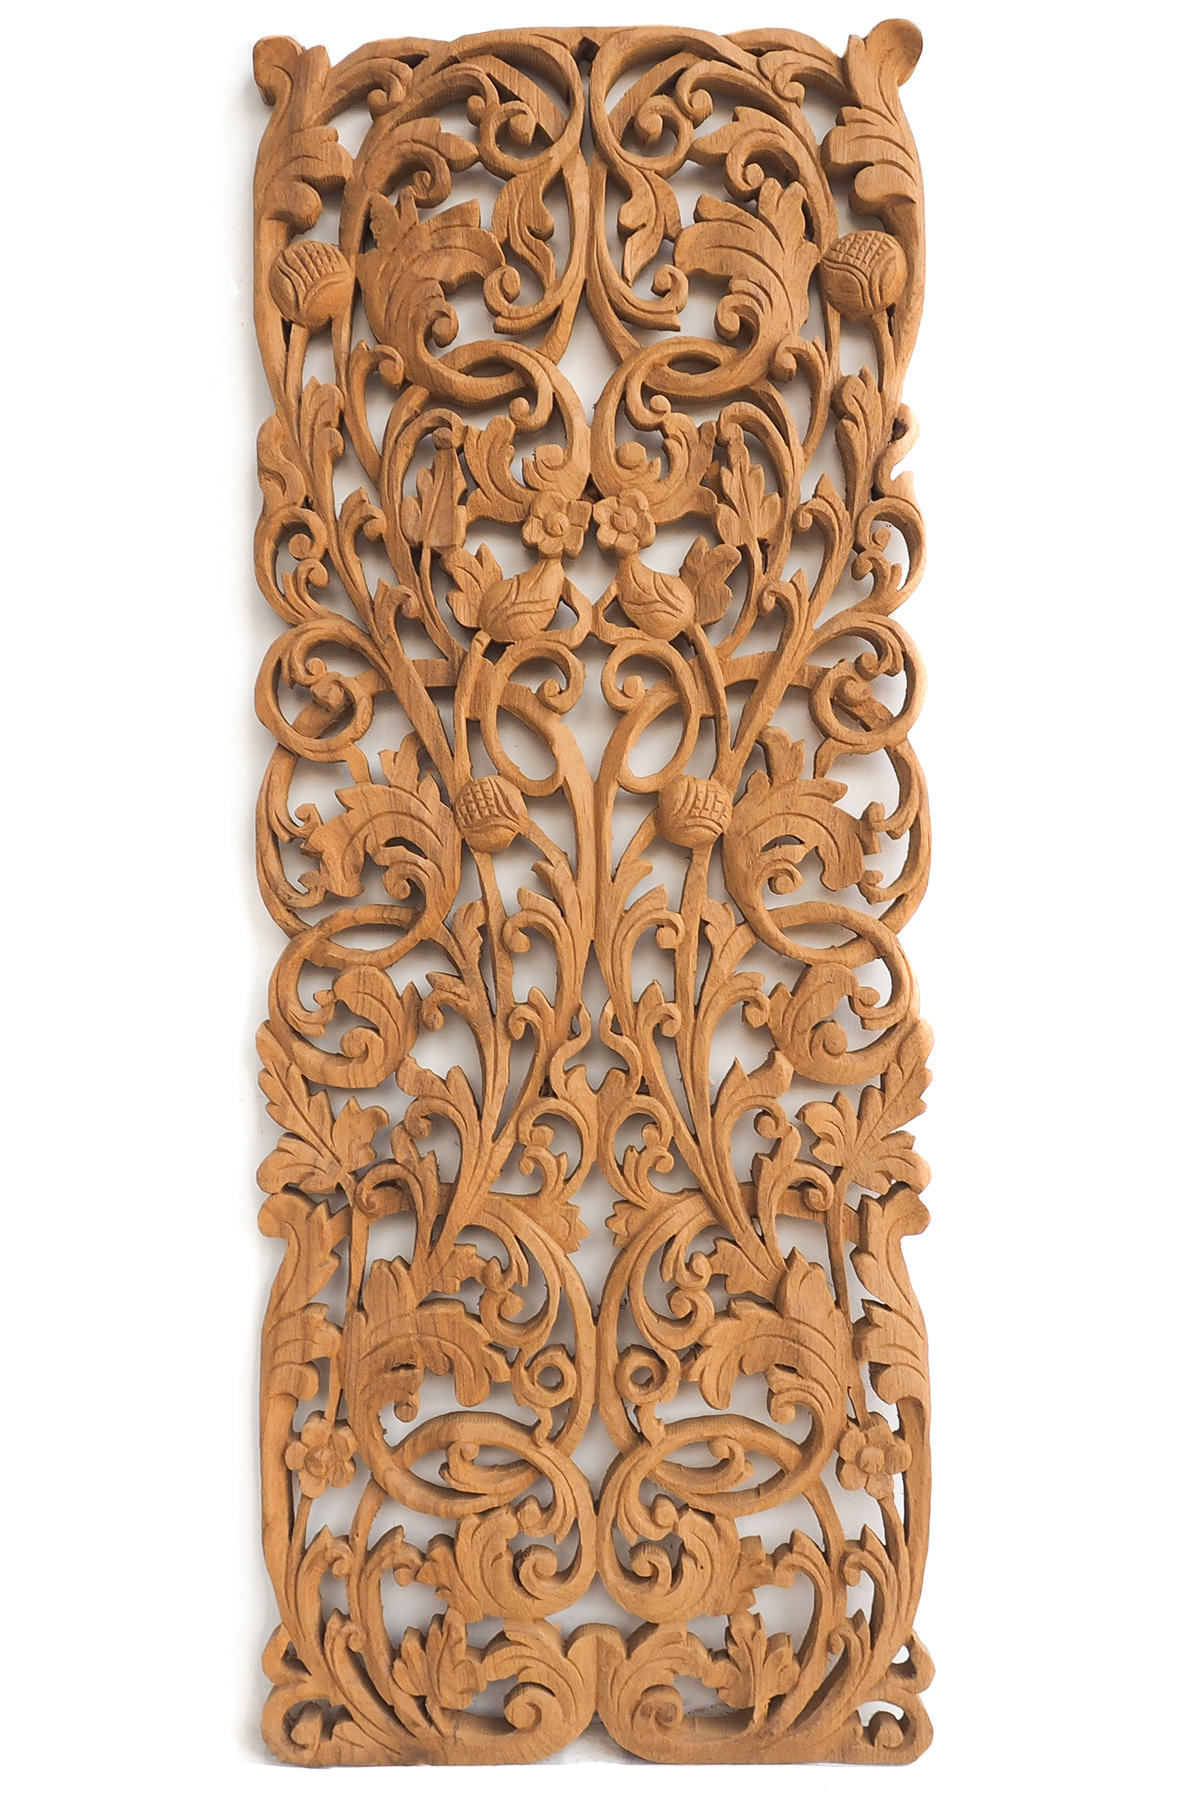 Large wall hanging wood carving